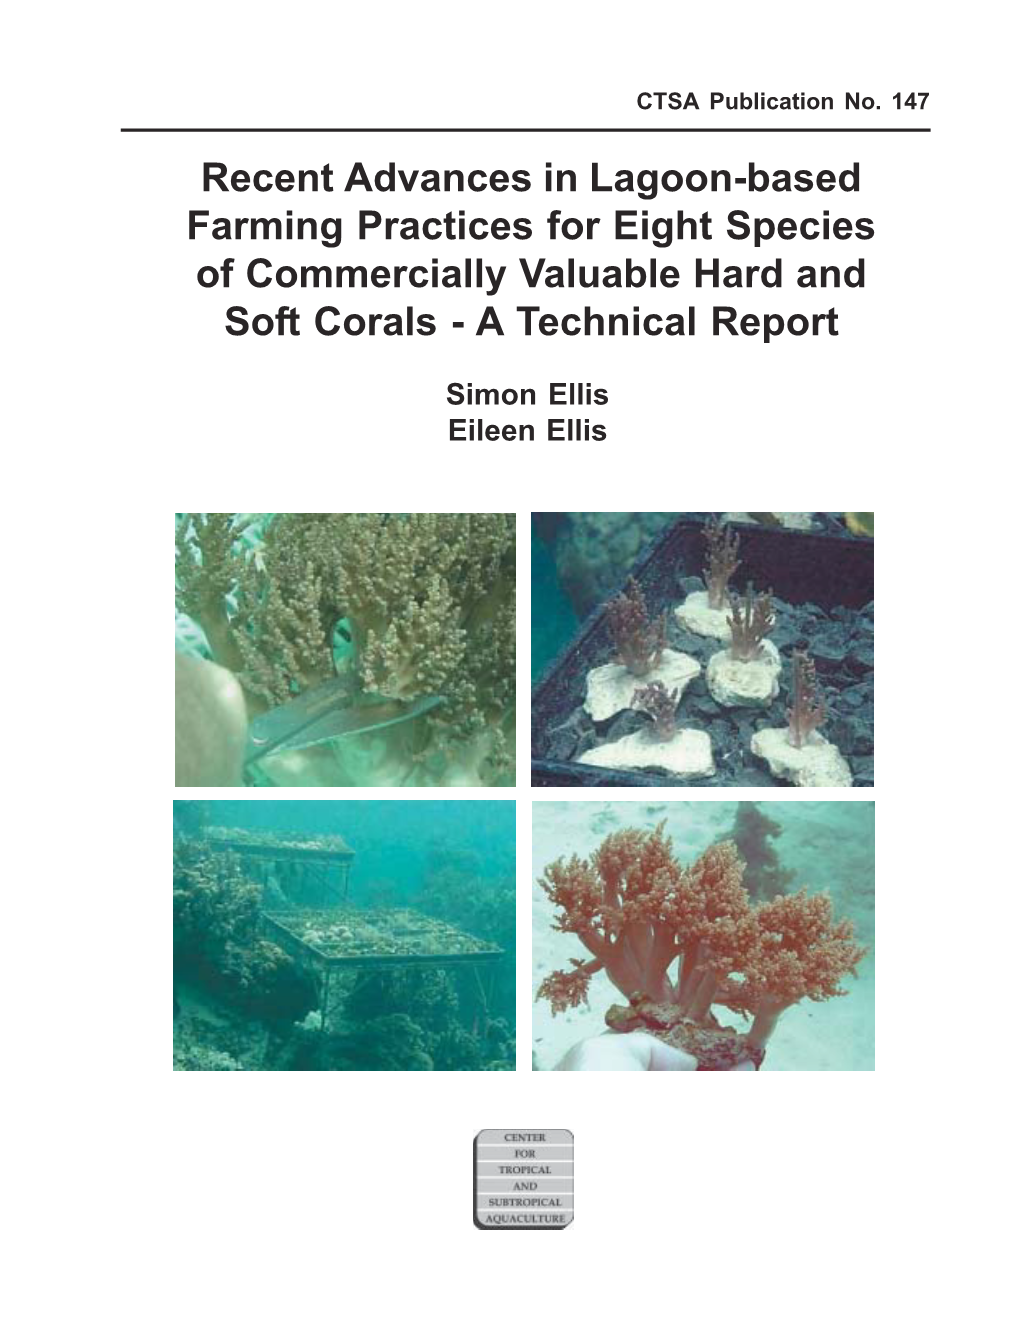 Recent Advances in Lagoon-Based Farming Practices for Eight Species of Commercially Valuable Hard and Soft Corals - a Technical Report